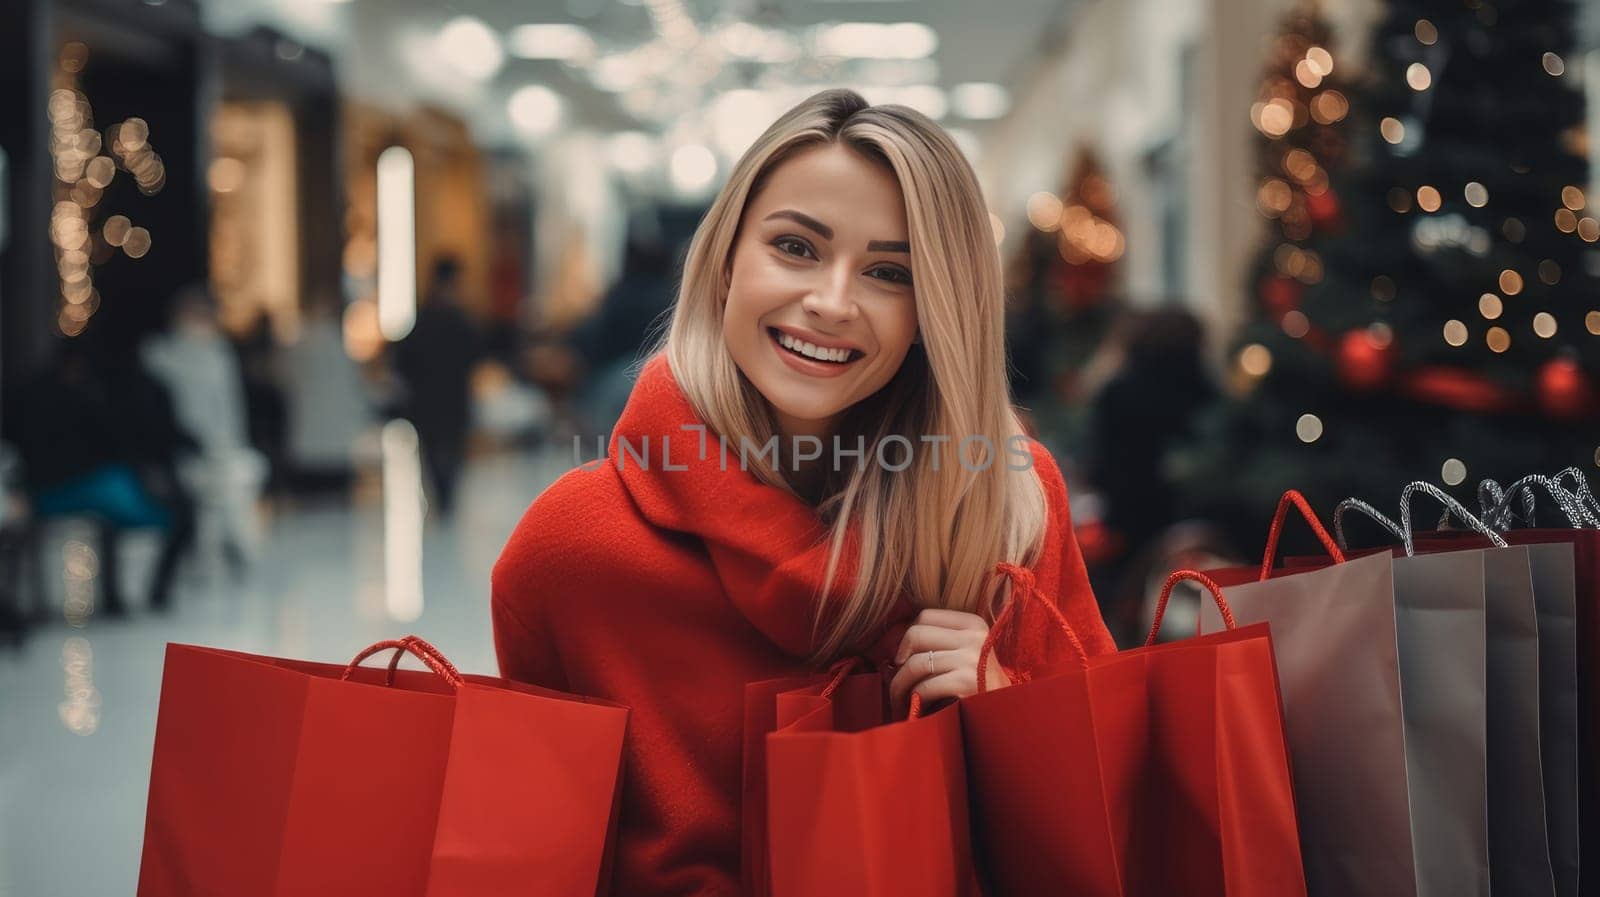 Smiling woman with Christmas gifts in shopping bags at the mall. Christmas sale concept by Alla_Yurtayeva